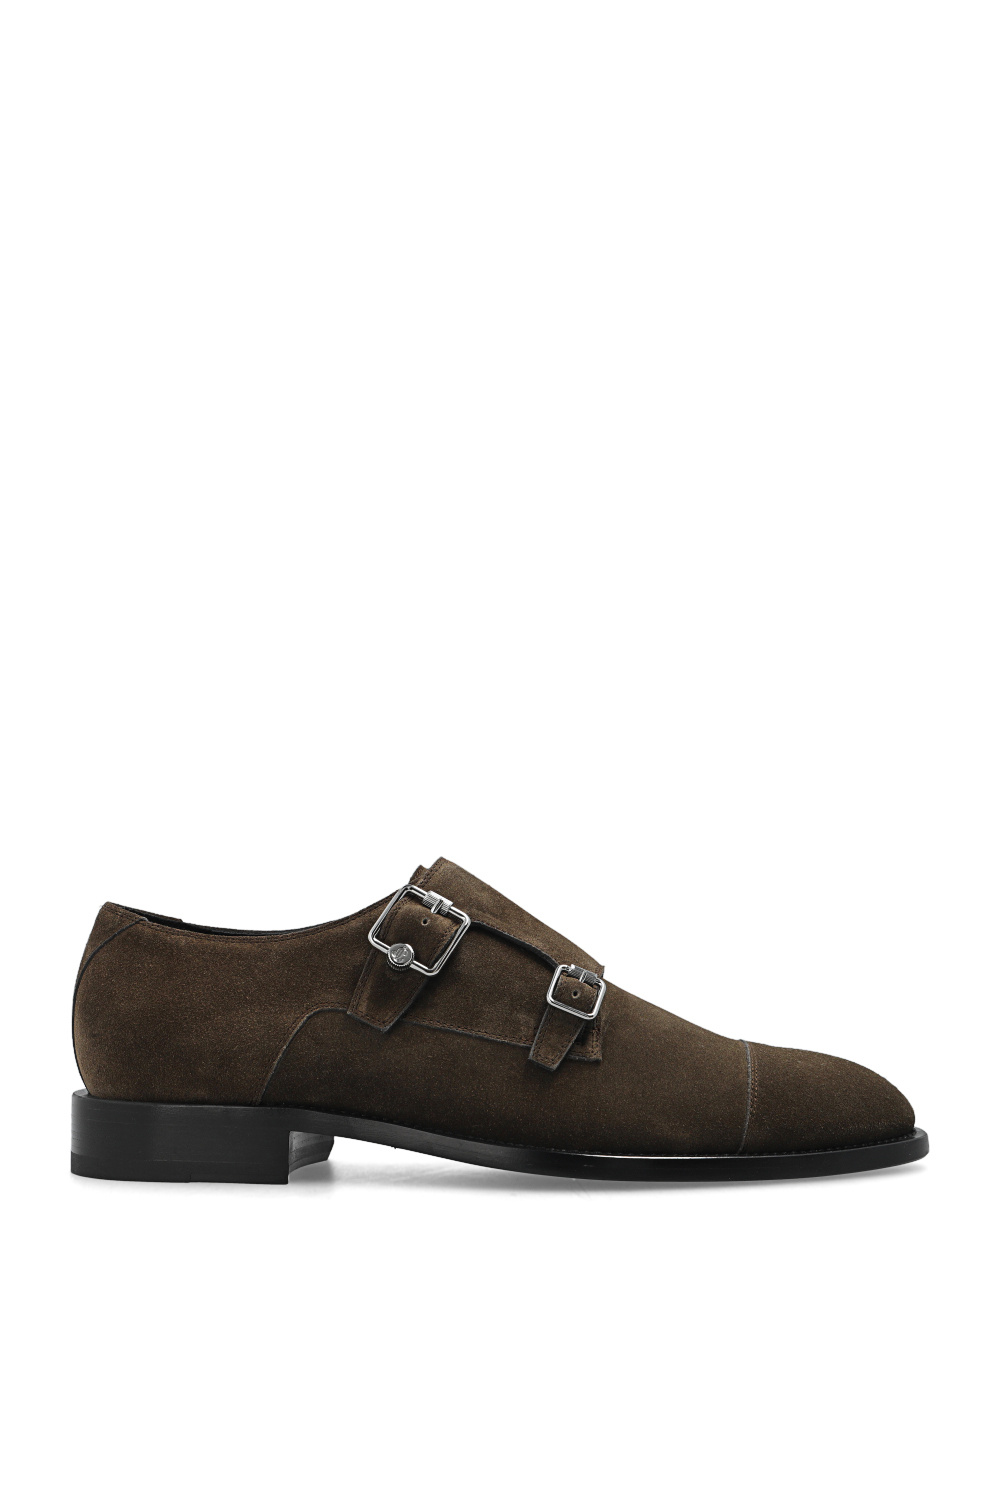 Mens Shoes Slip-on shoes Monk shoes Jimmy Choo finnion Suede Shoes in Brown for Men 